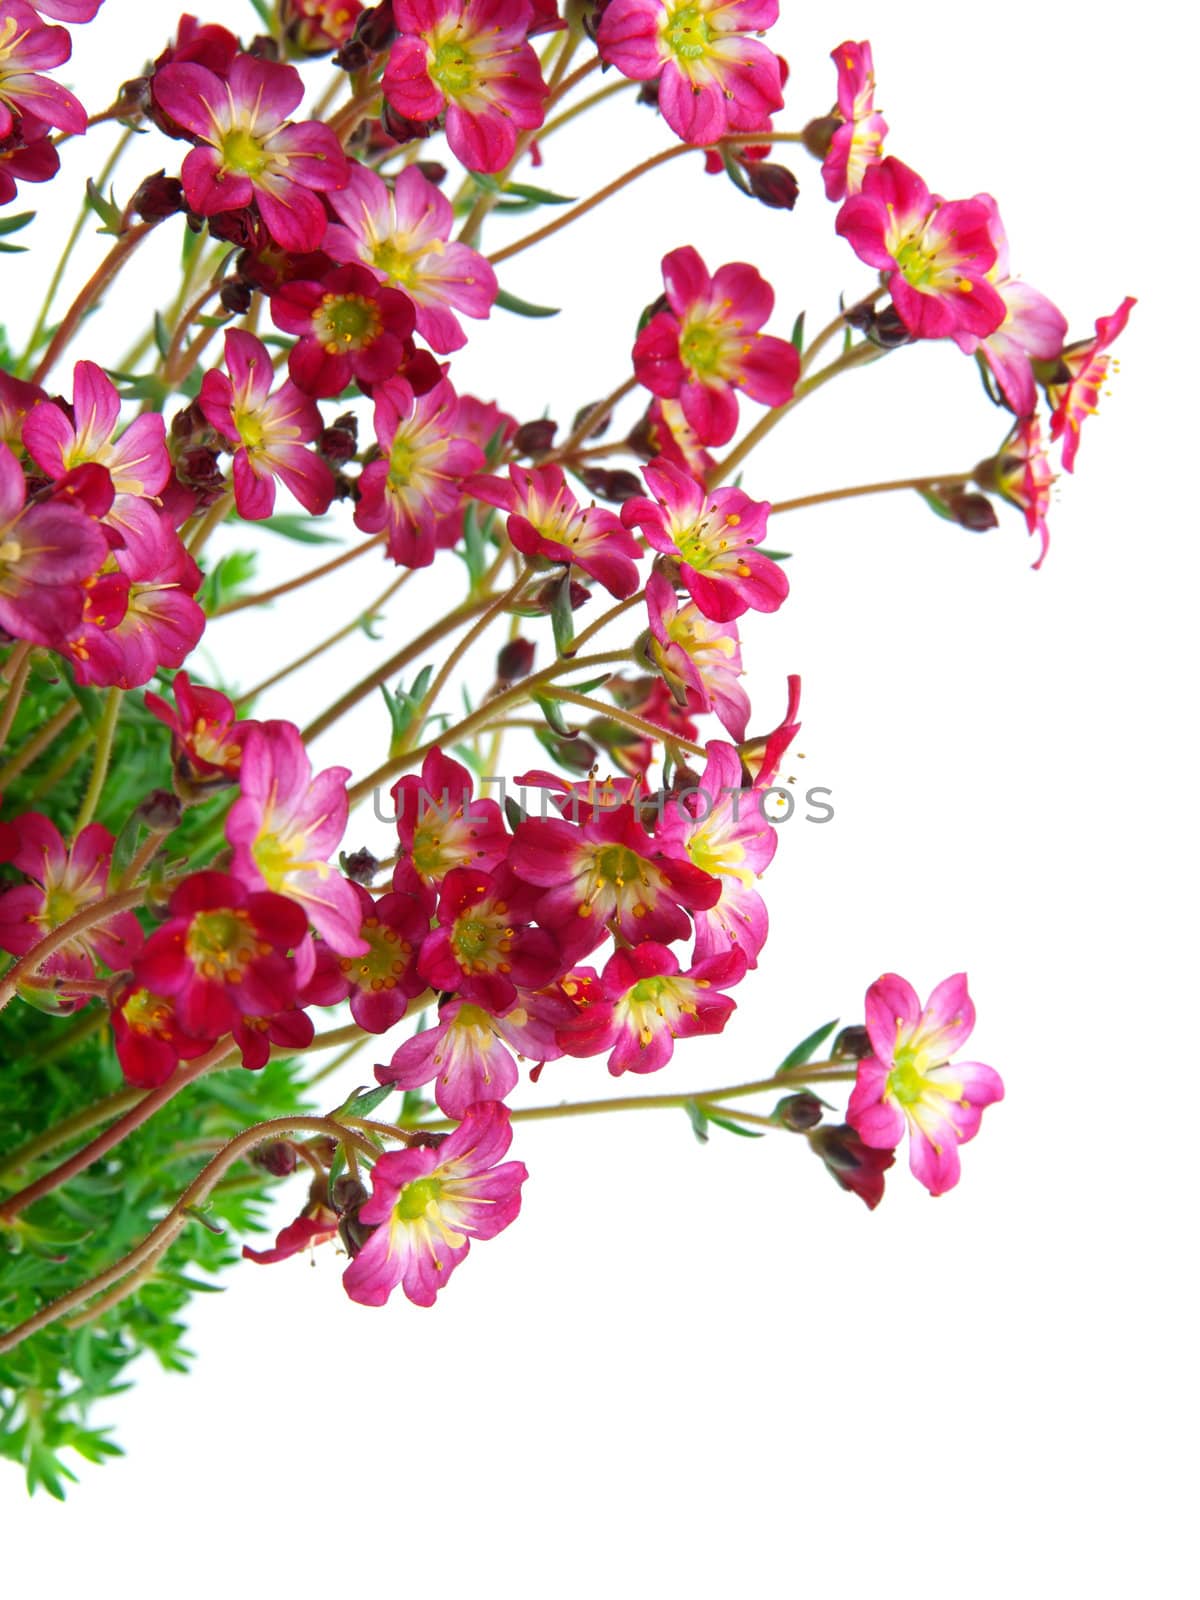 Flowers on isolated background, with room for text  by motorolka